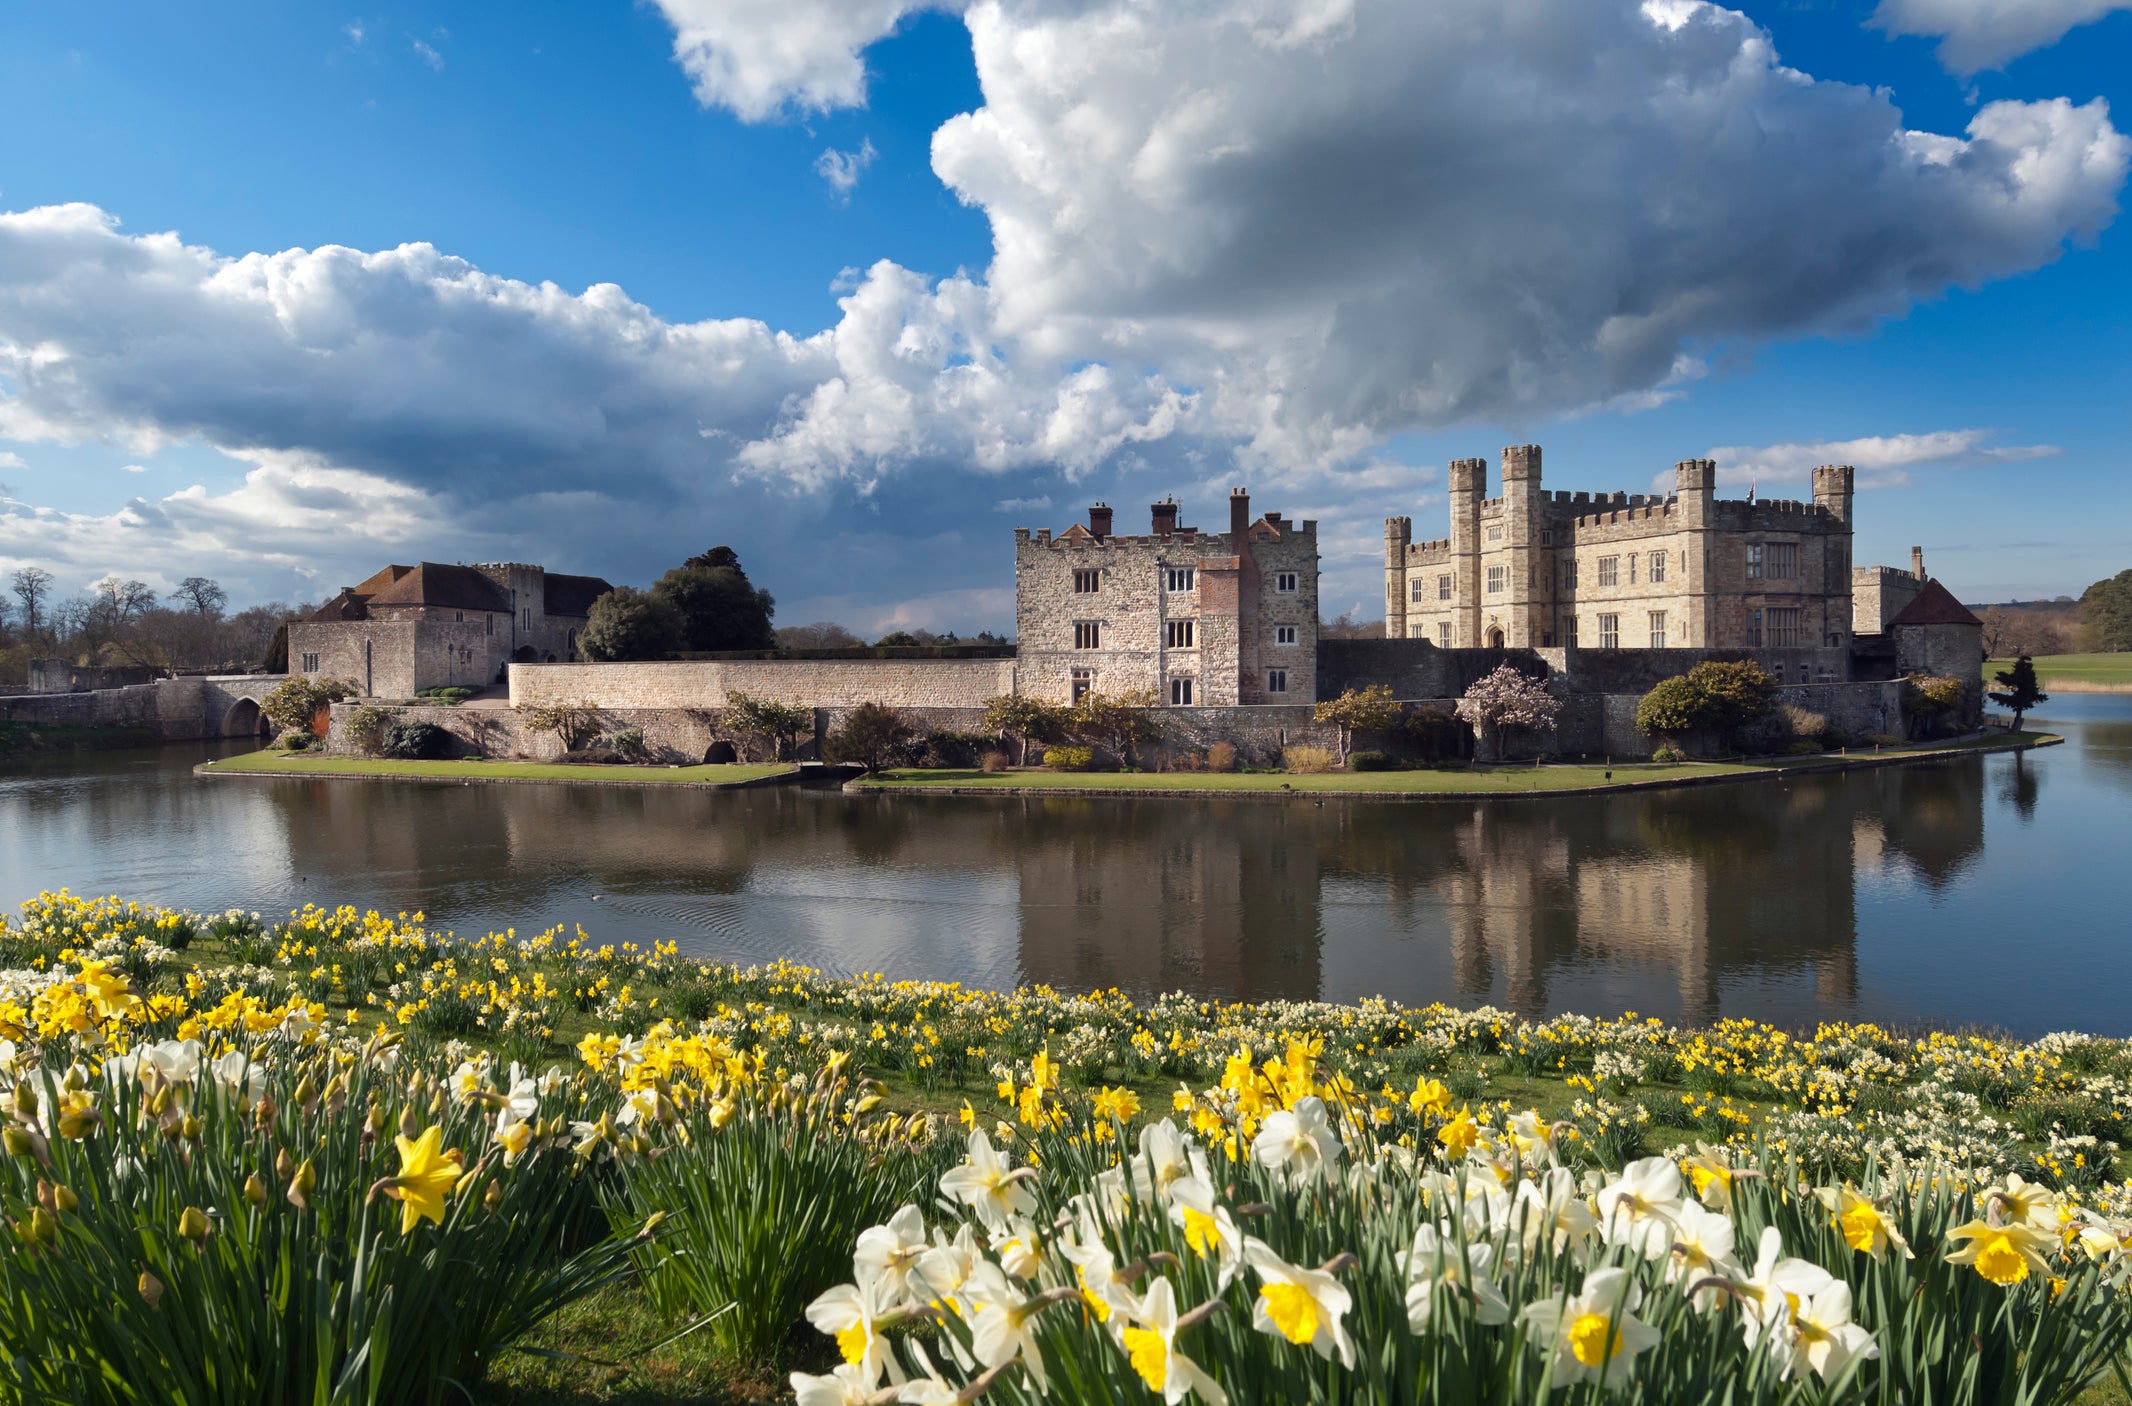 Indulge your dad's love of history this Father's Day at Leeds Castle